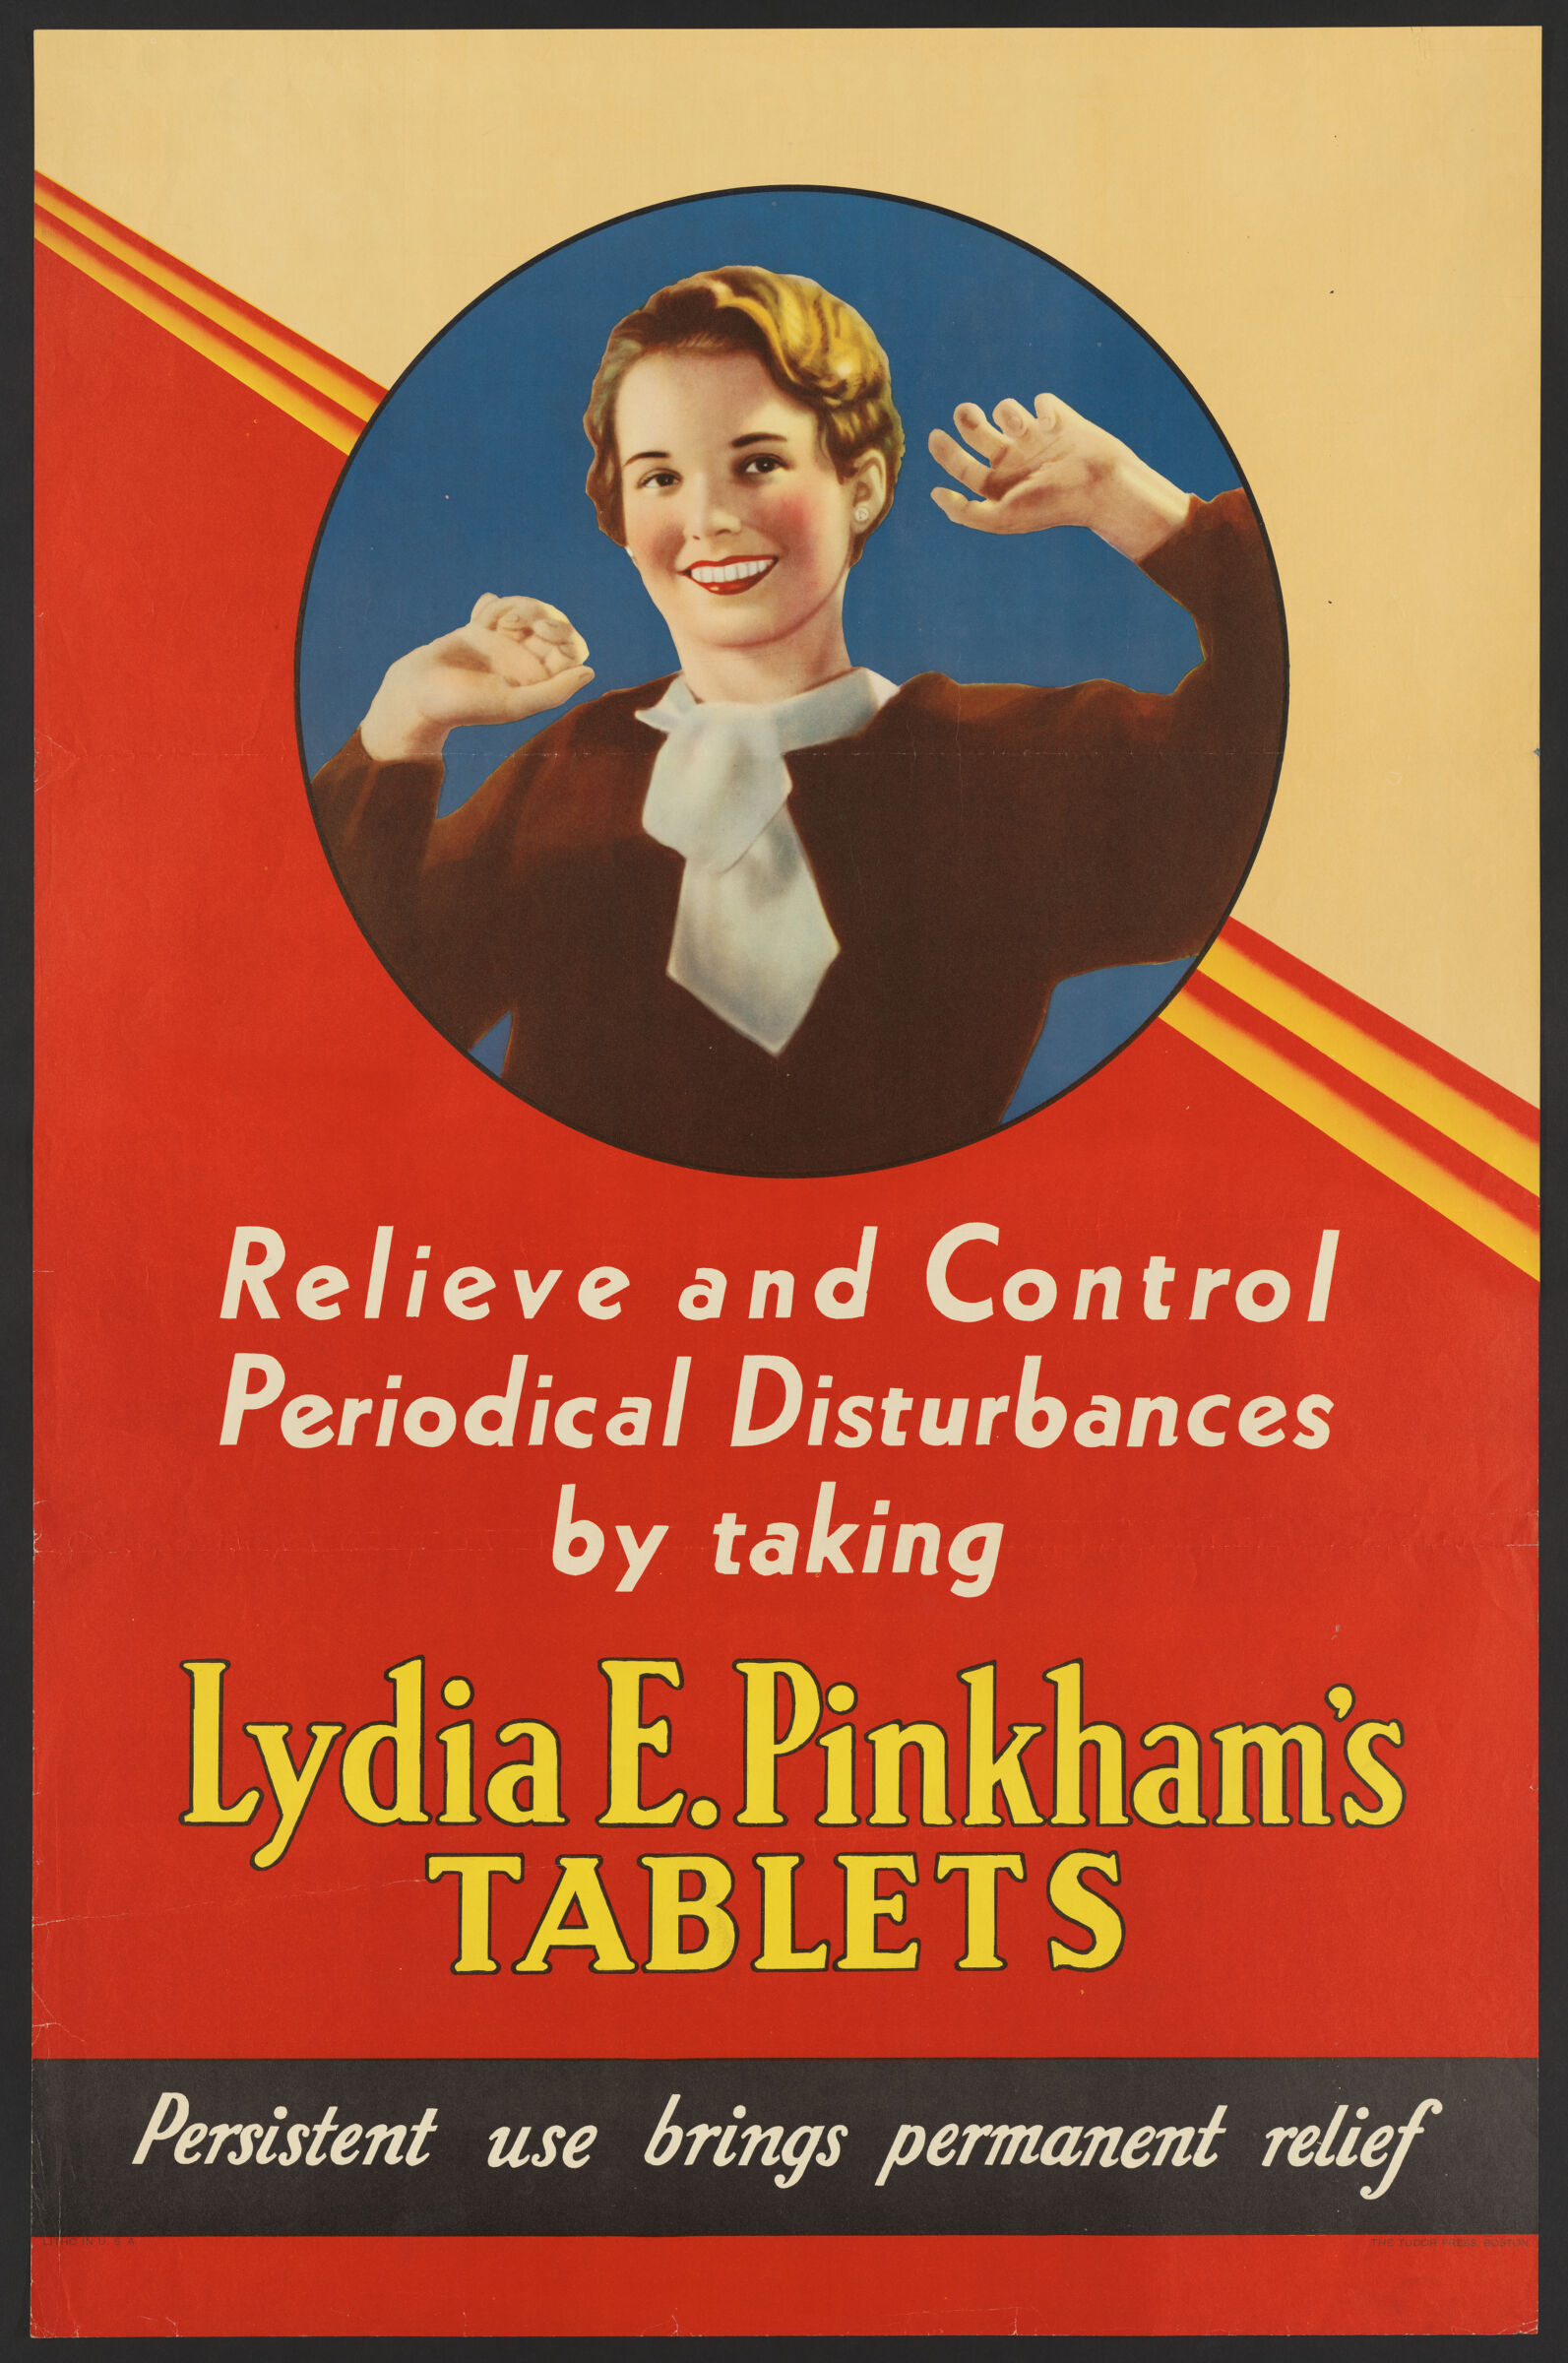 Advertising poster for Lydia E. Pinkham's Tablets "Relieve and Control Periodical Disturbances by taking Lydia E. Pinkham's Tablets Persistent use brings permanent relief"